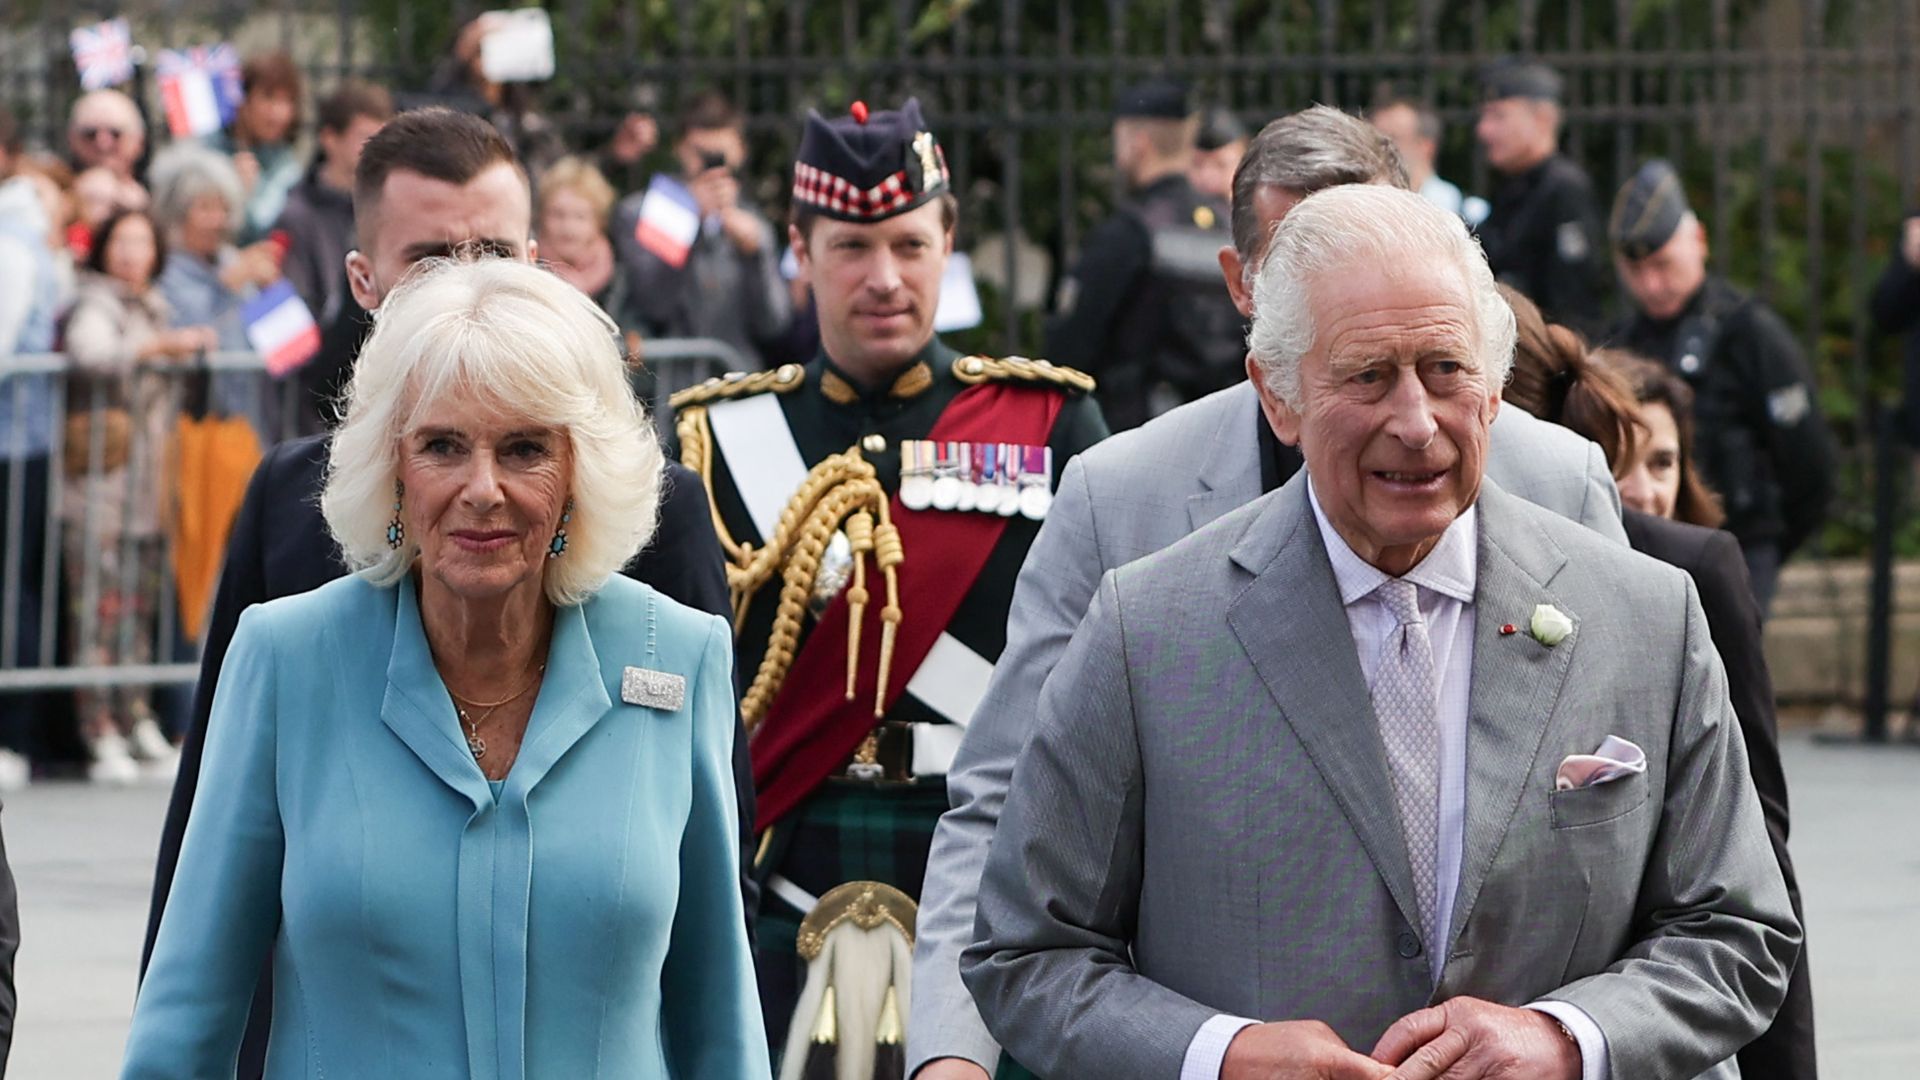 Lt Col Johnny Thompson is pictured walking behind Charles and Camilla in France